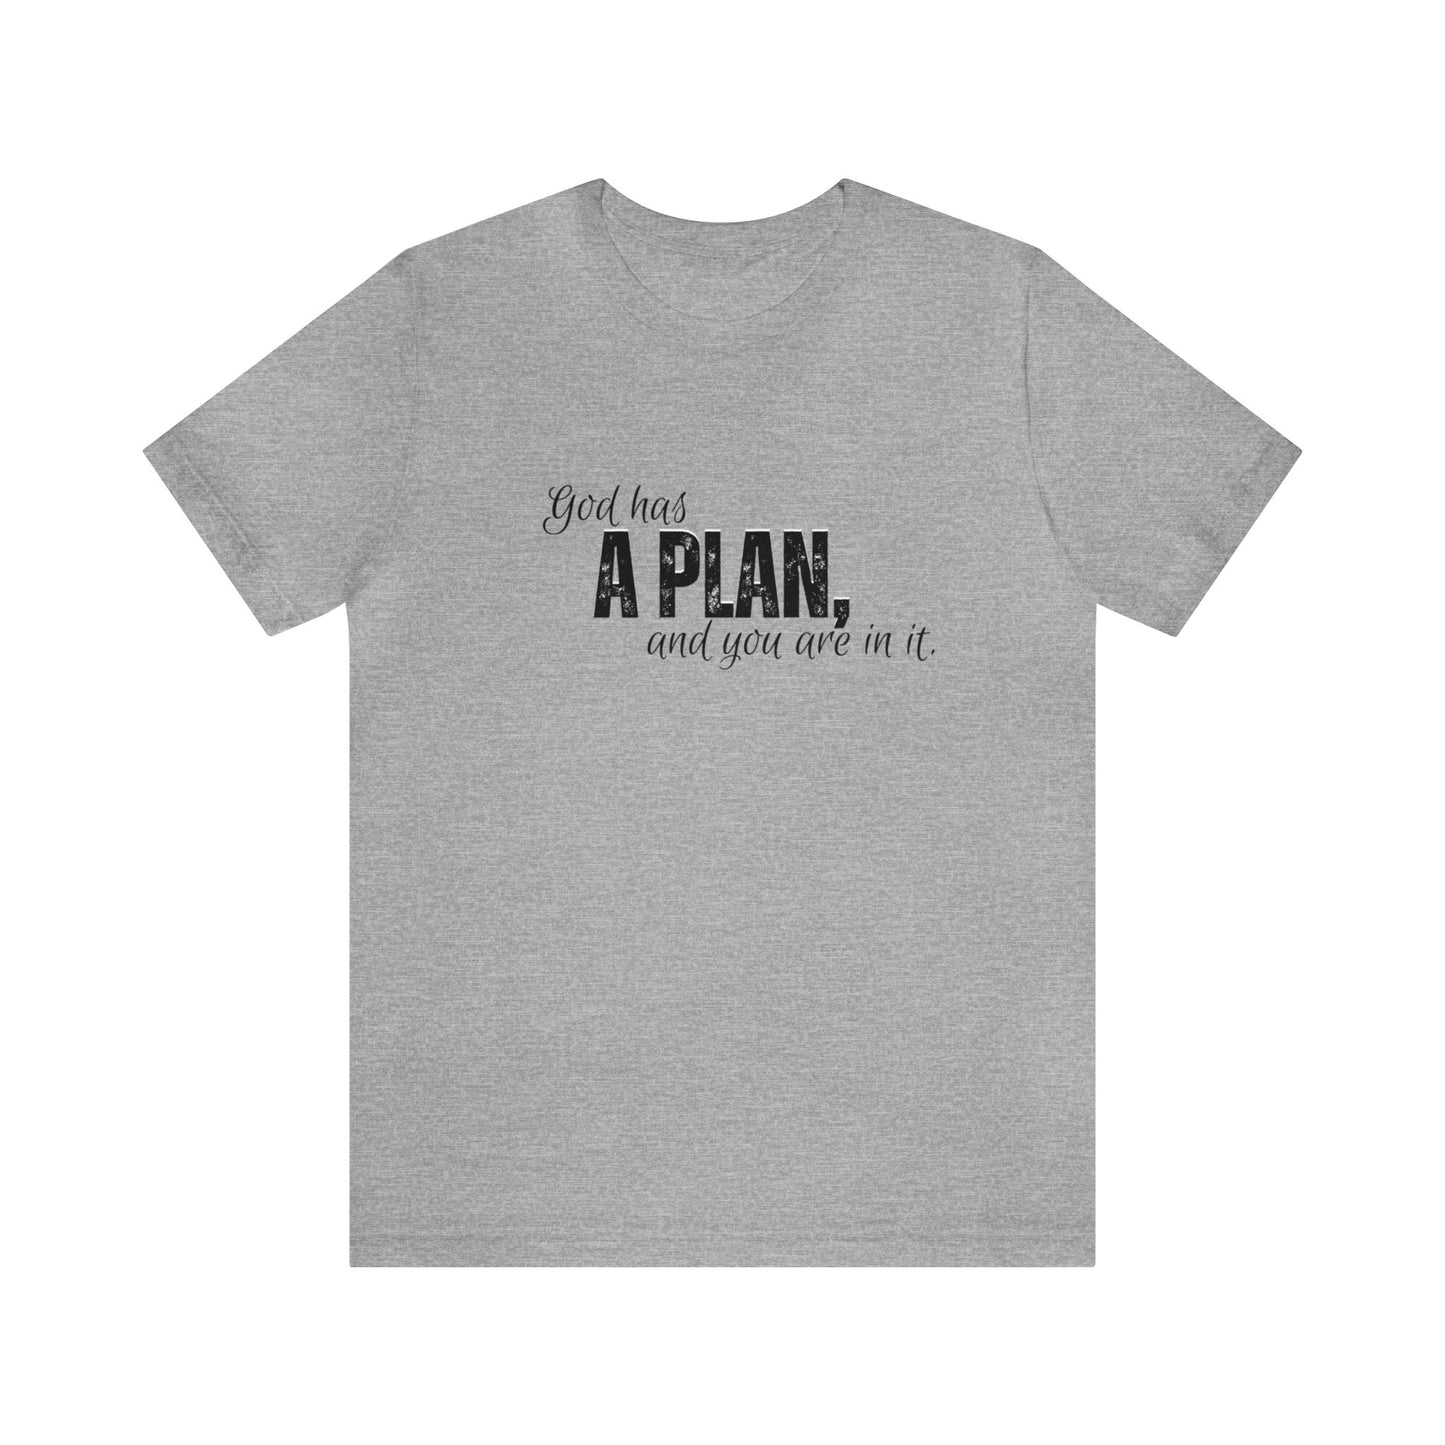 God has a plan, Express Delivery, Christian T-shirt for Men and Women